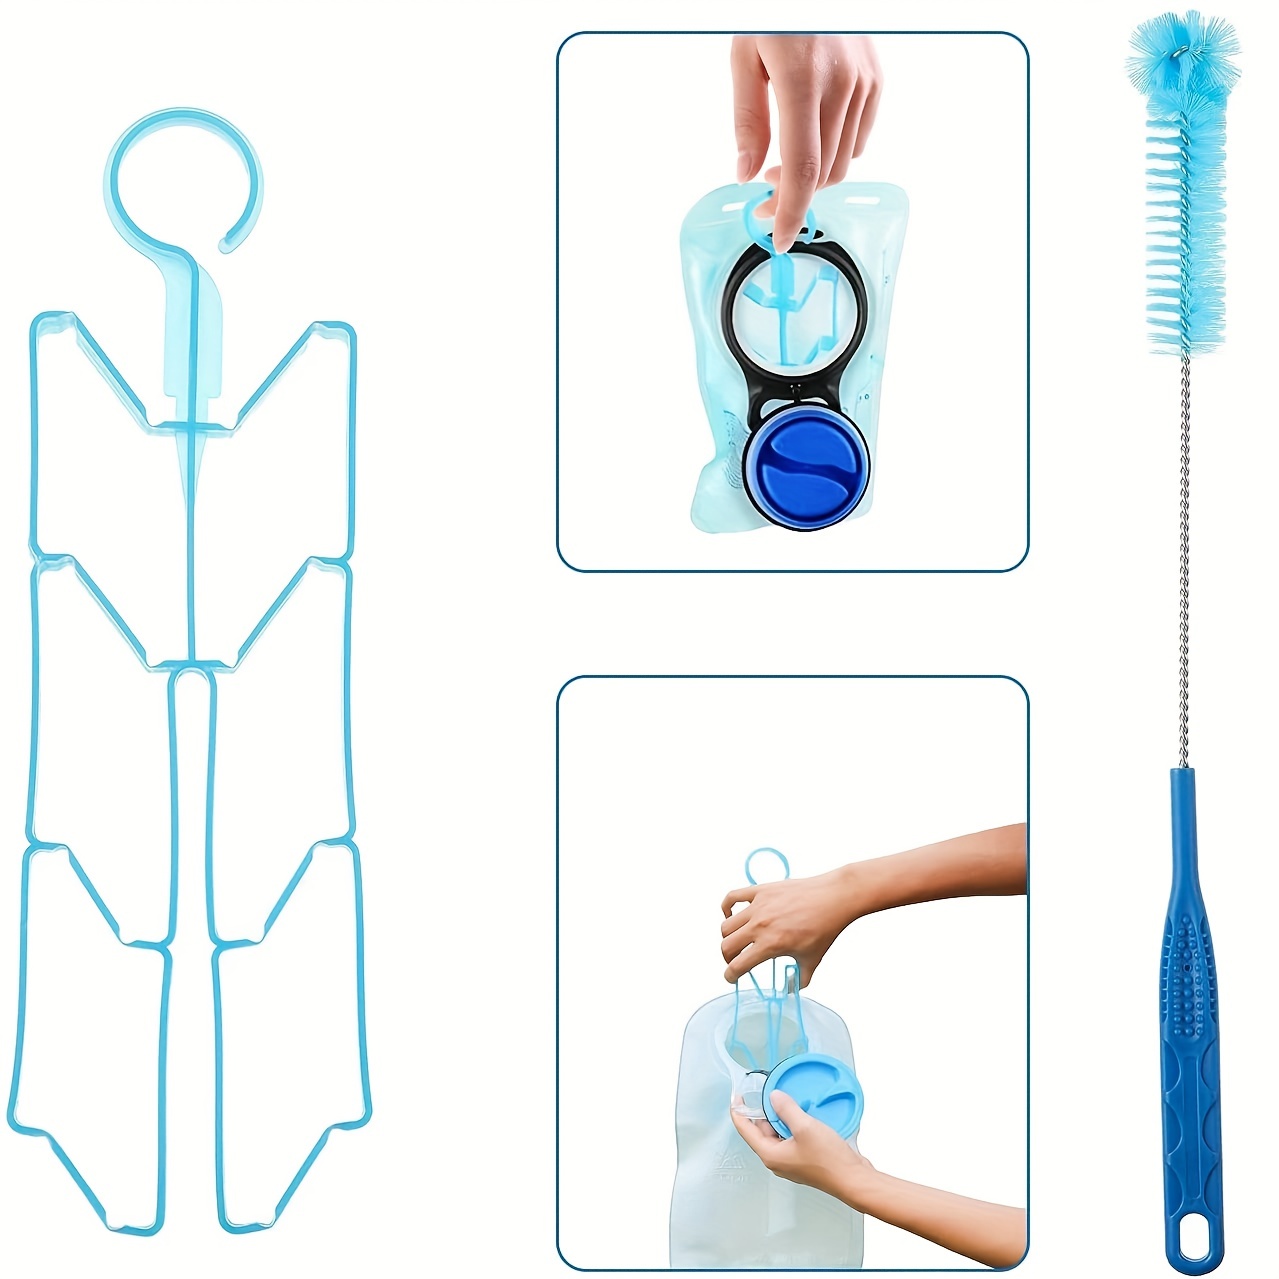 TAGVO Hydration Bladder Cleaning Kit, 6 in 1 Water Bladder Cleaner Set - 3  Brushes, Collapsible Hanger, 12 Cleaning Tablets & Carry Pouch, Water